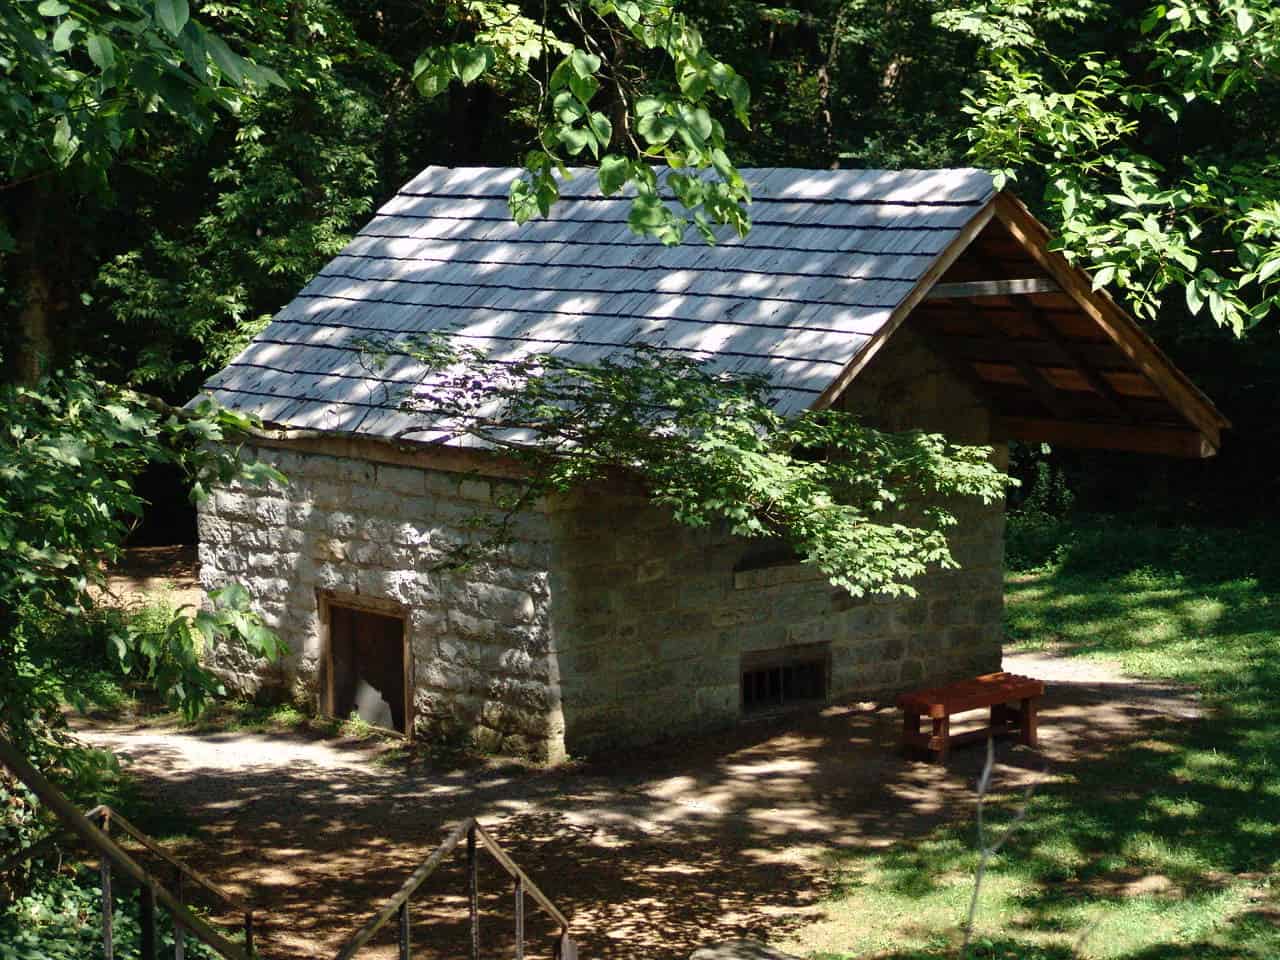 Springhouse at The Hermitage in Nashville, Tennessee